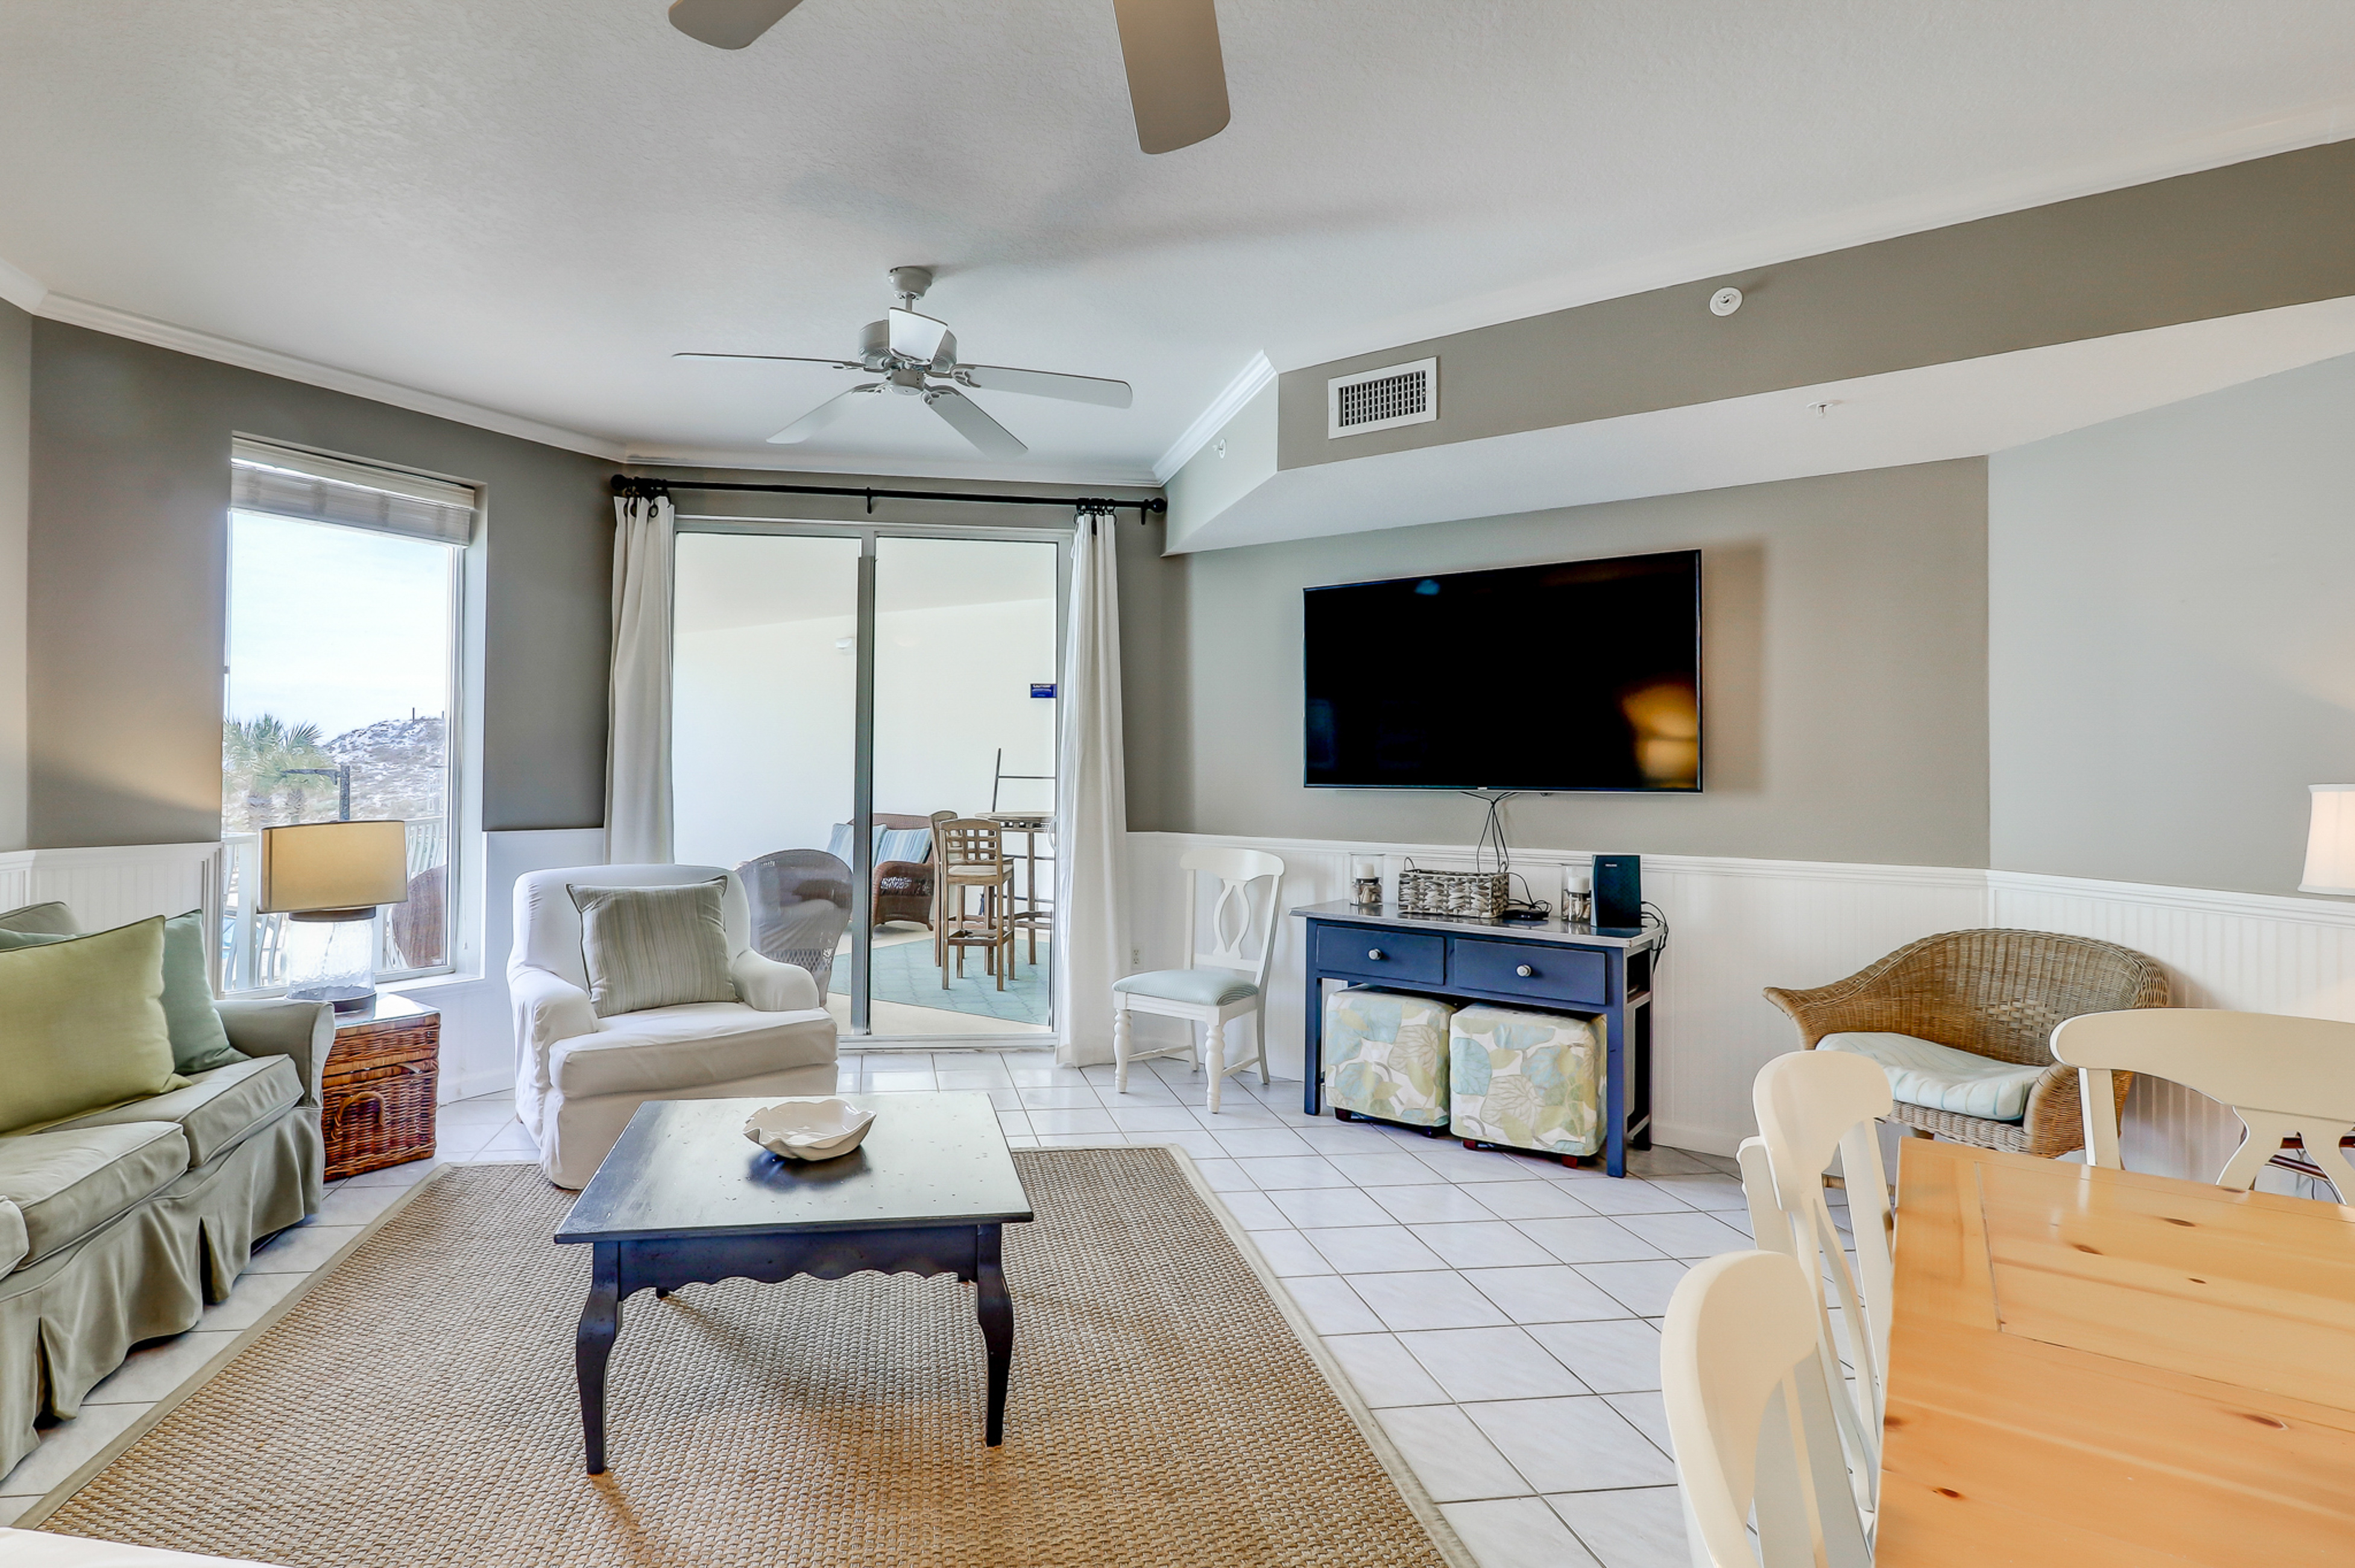 Dunes of Seagrove B102 Condo rental in Dunes of Seagrove in Highway 30-A Florida - #4